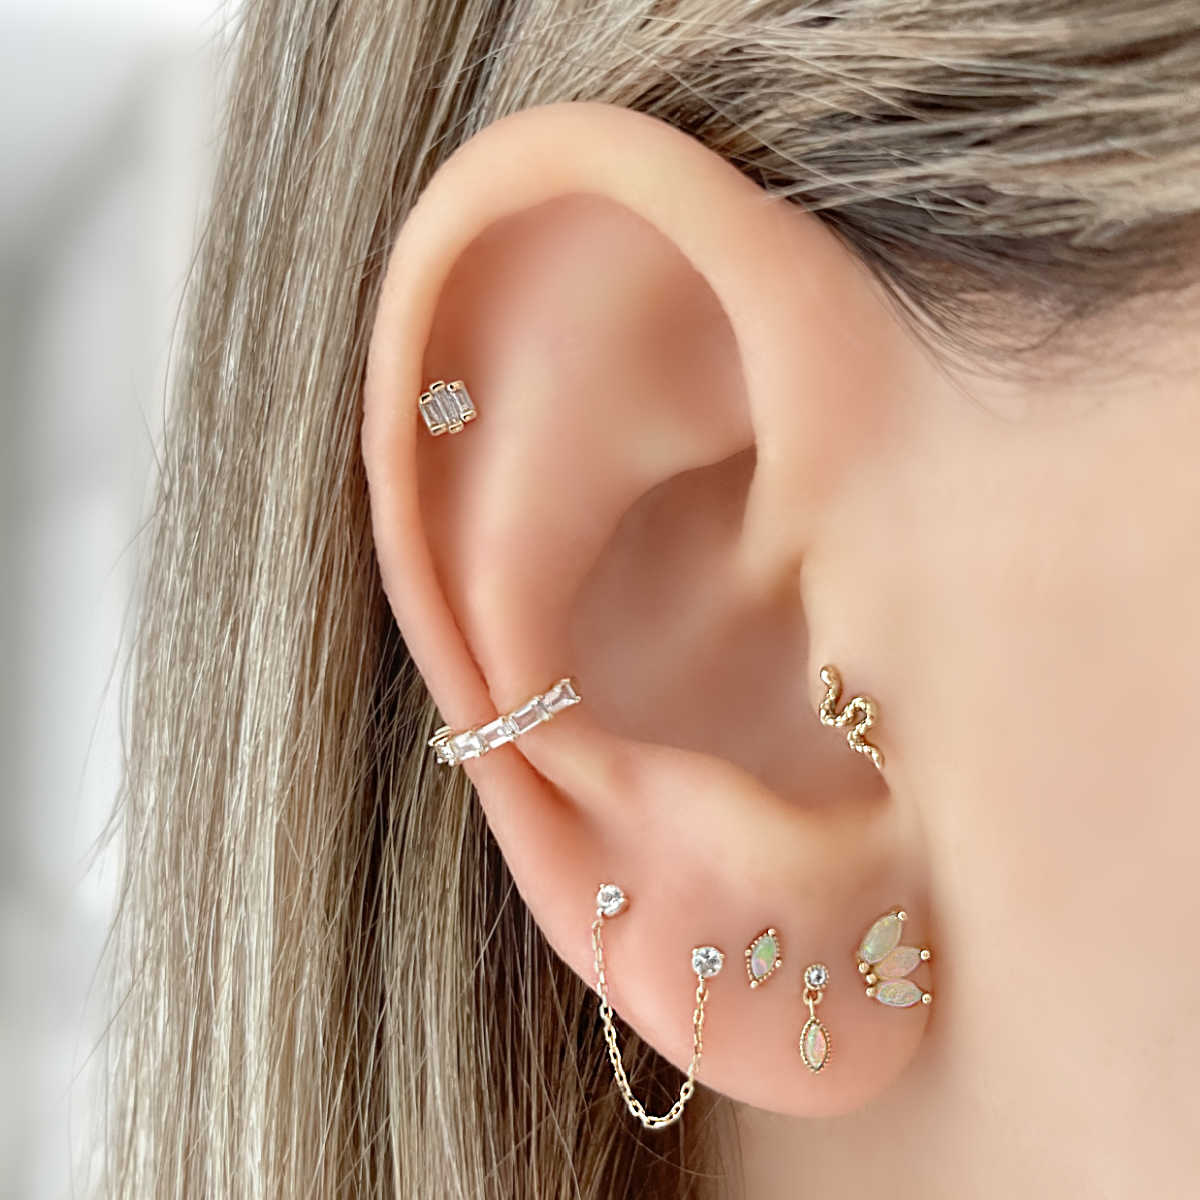 14k Tragus Cartilage Ear Piercing Earrings - With Safety Screw